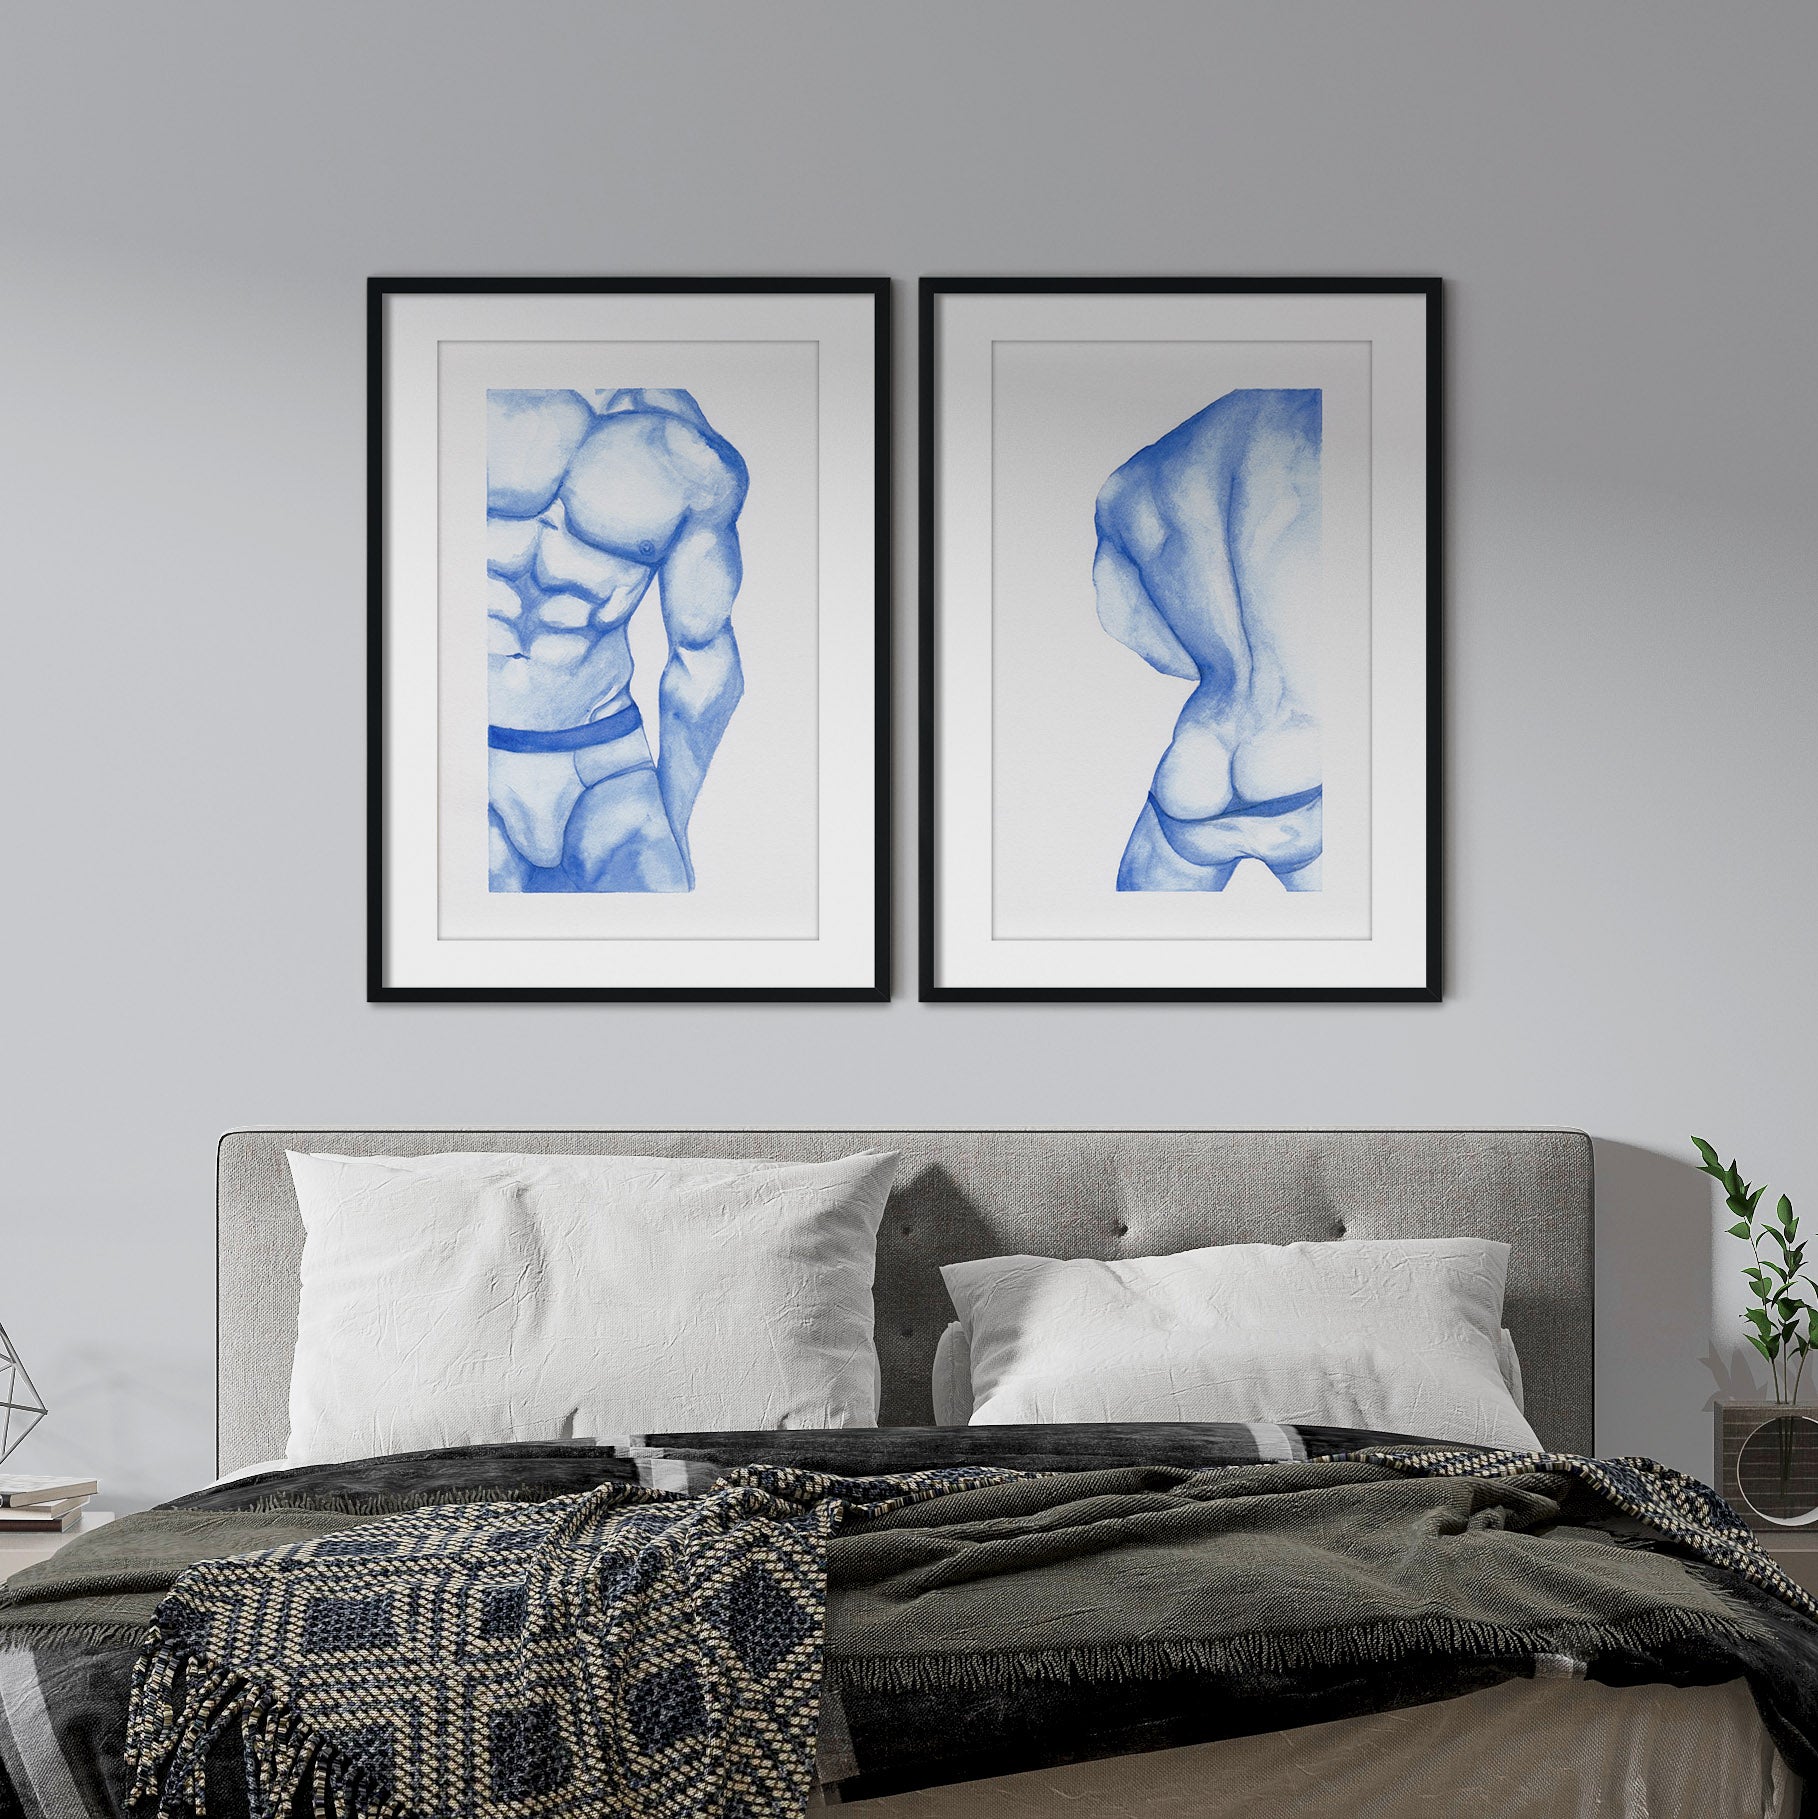 A set of 2 art prints featuring nude men painted in watercolor